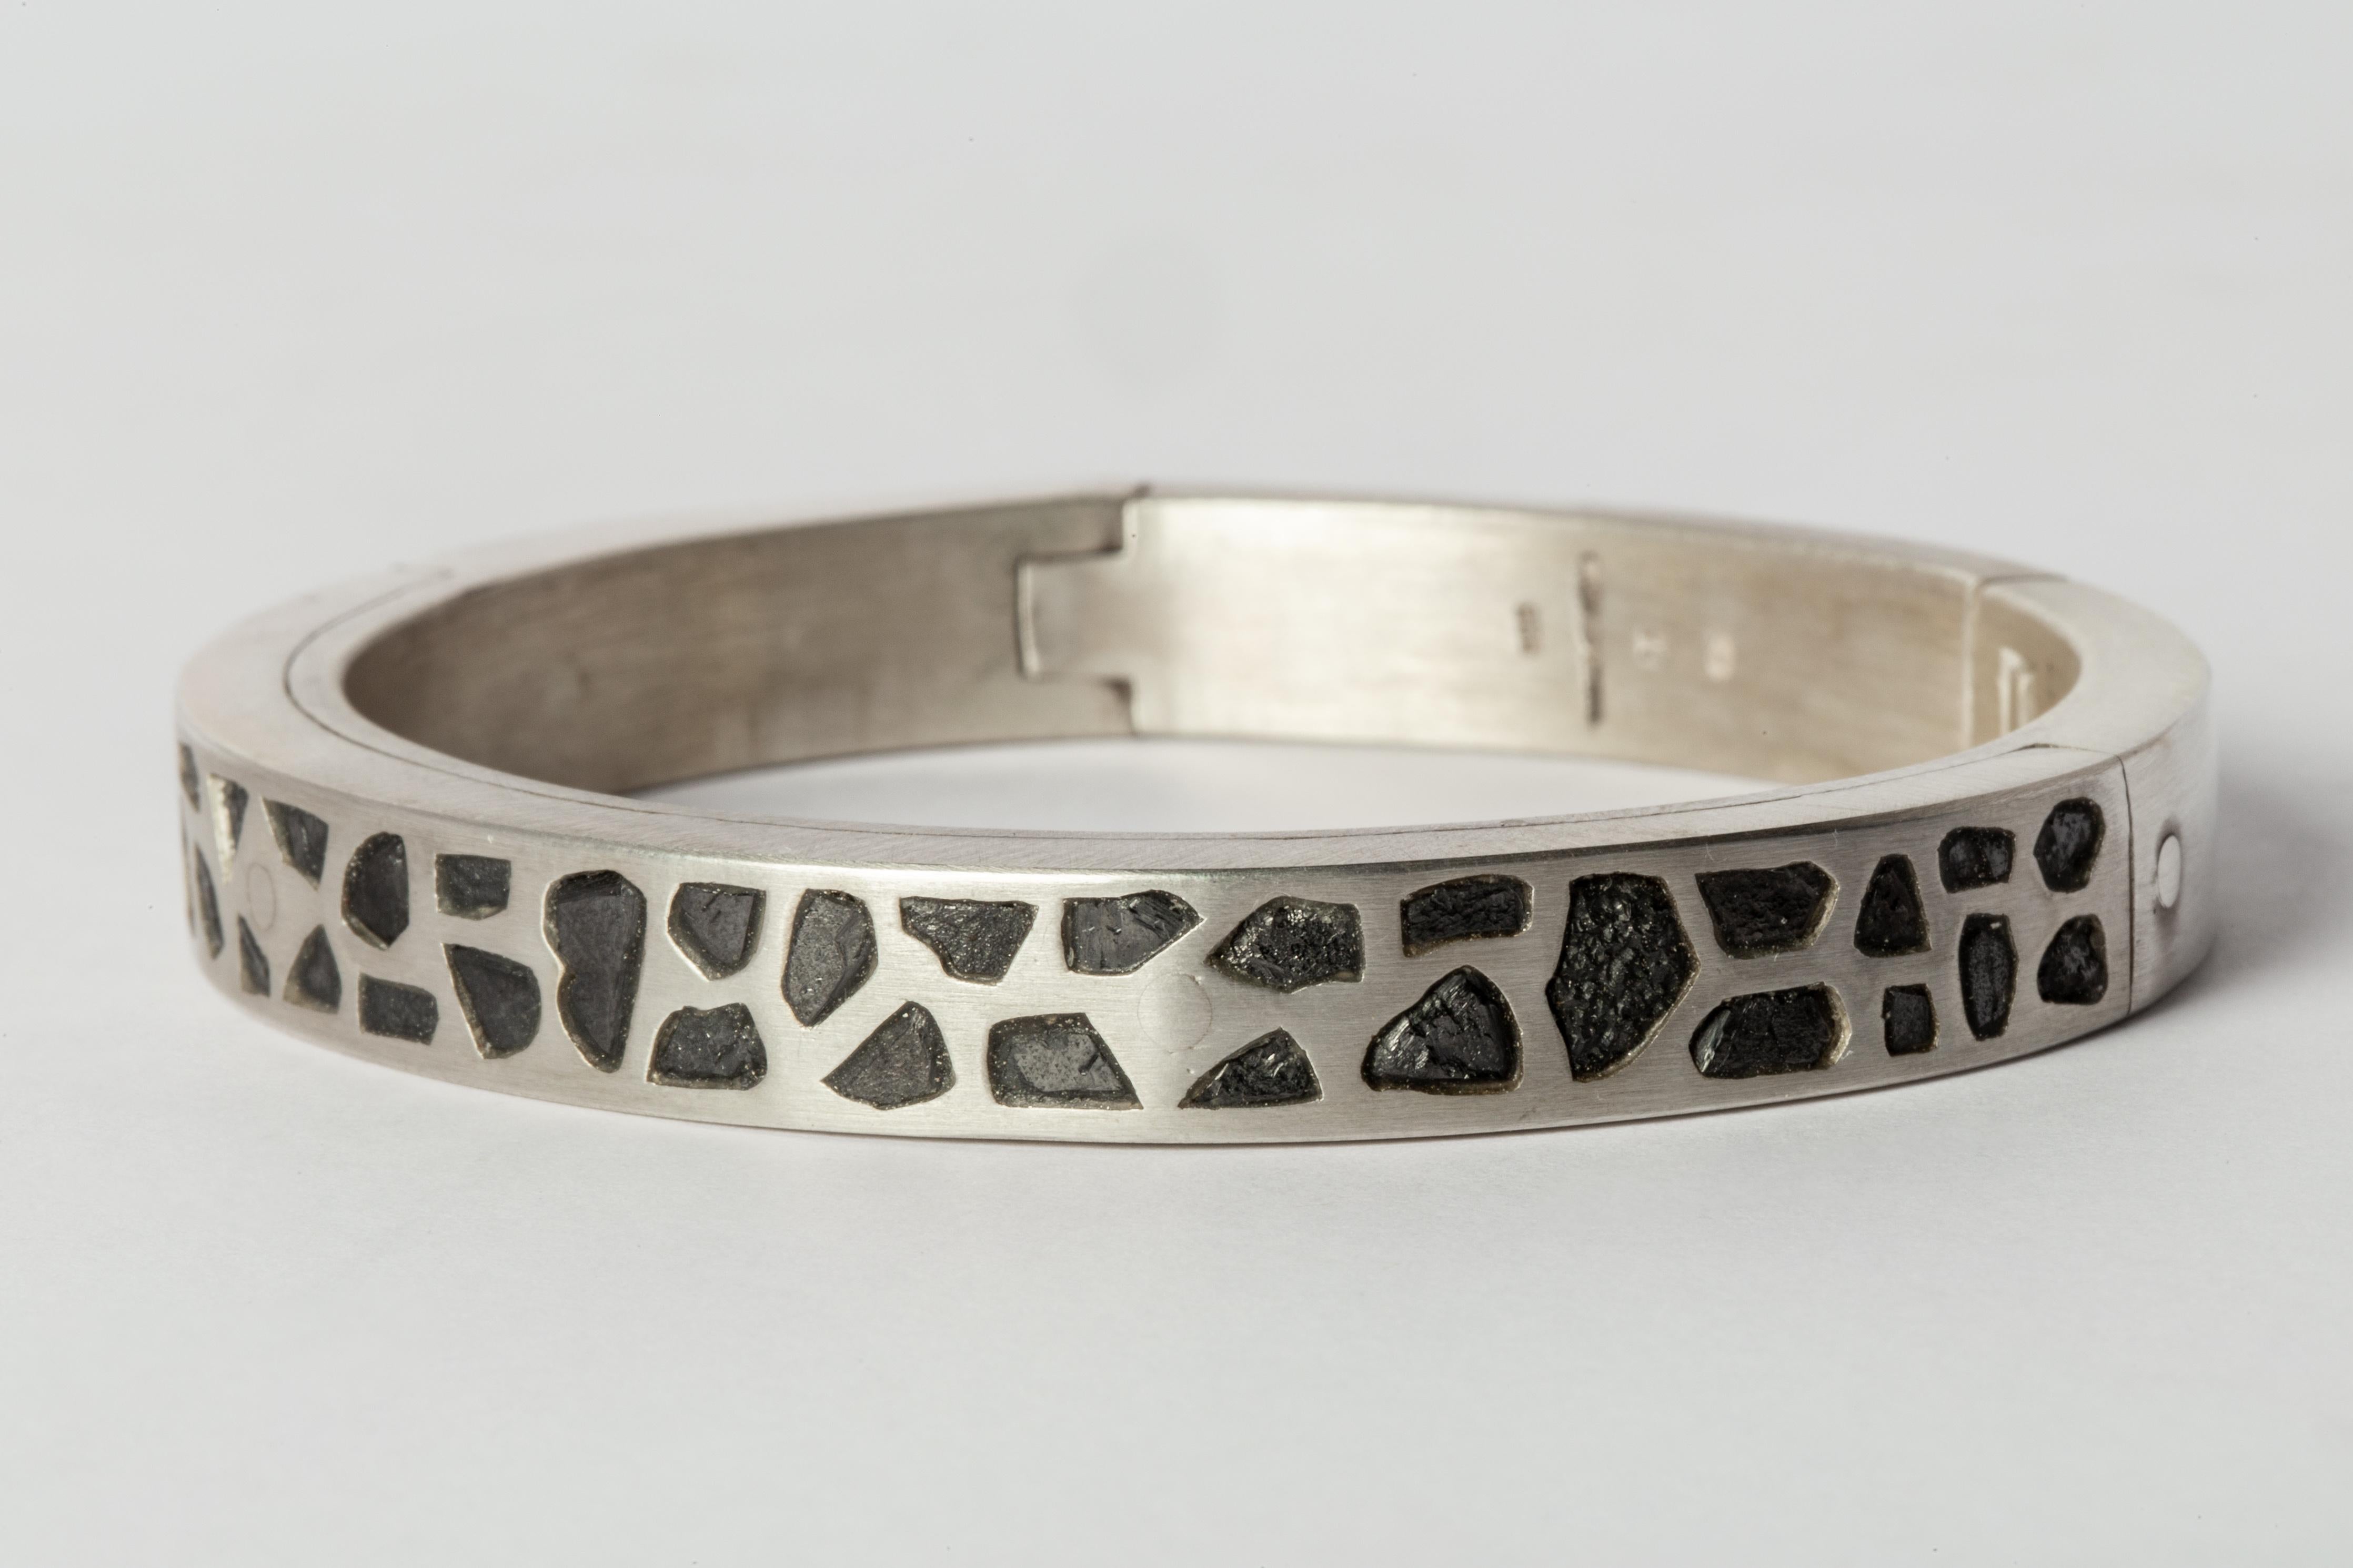 Bracelet in sterling silver and slabs of rough black diamond fragment set in mega pave setting. These slabs are removed from a larger chunk of diamond. This item is made with a naturally occurring element and will vary from the photograph you see.